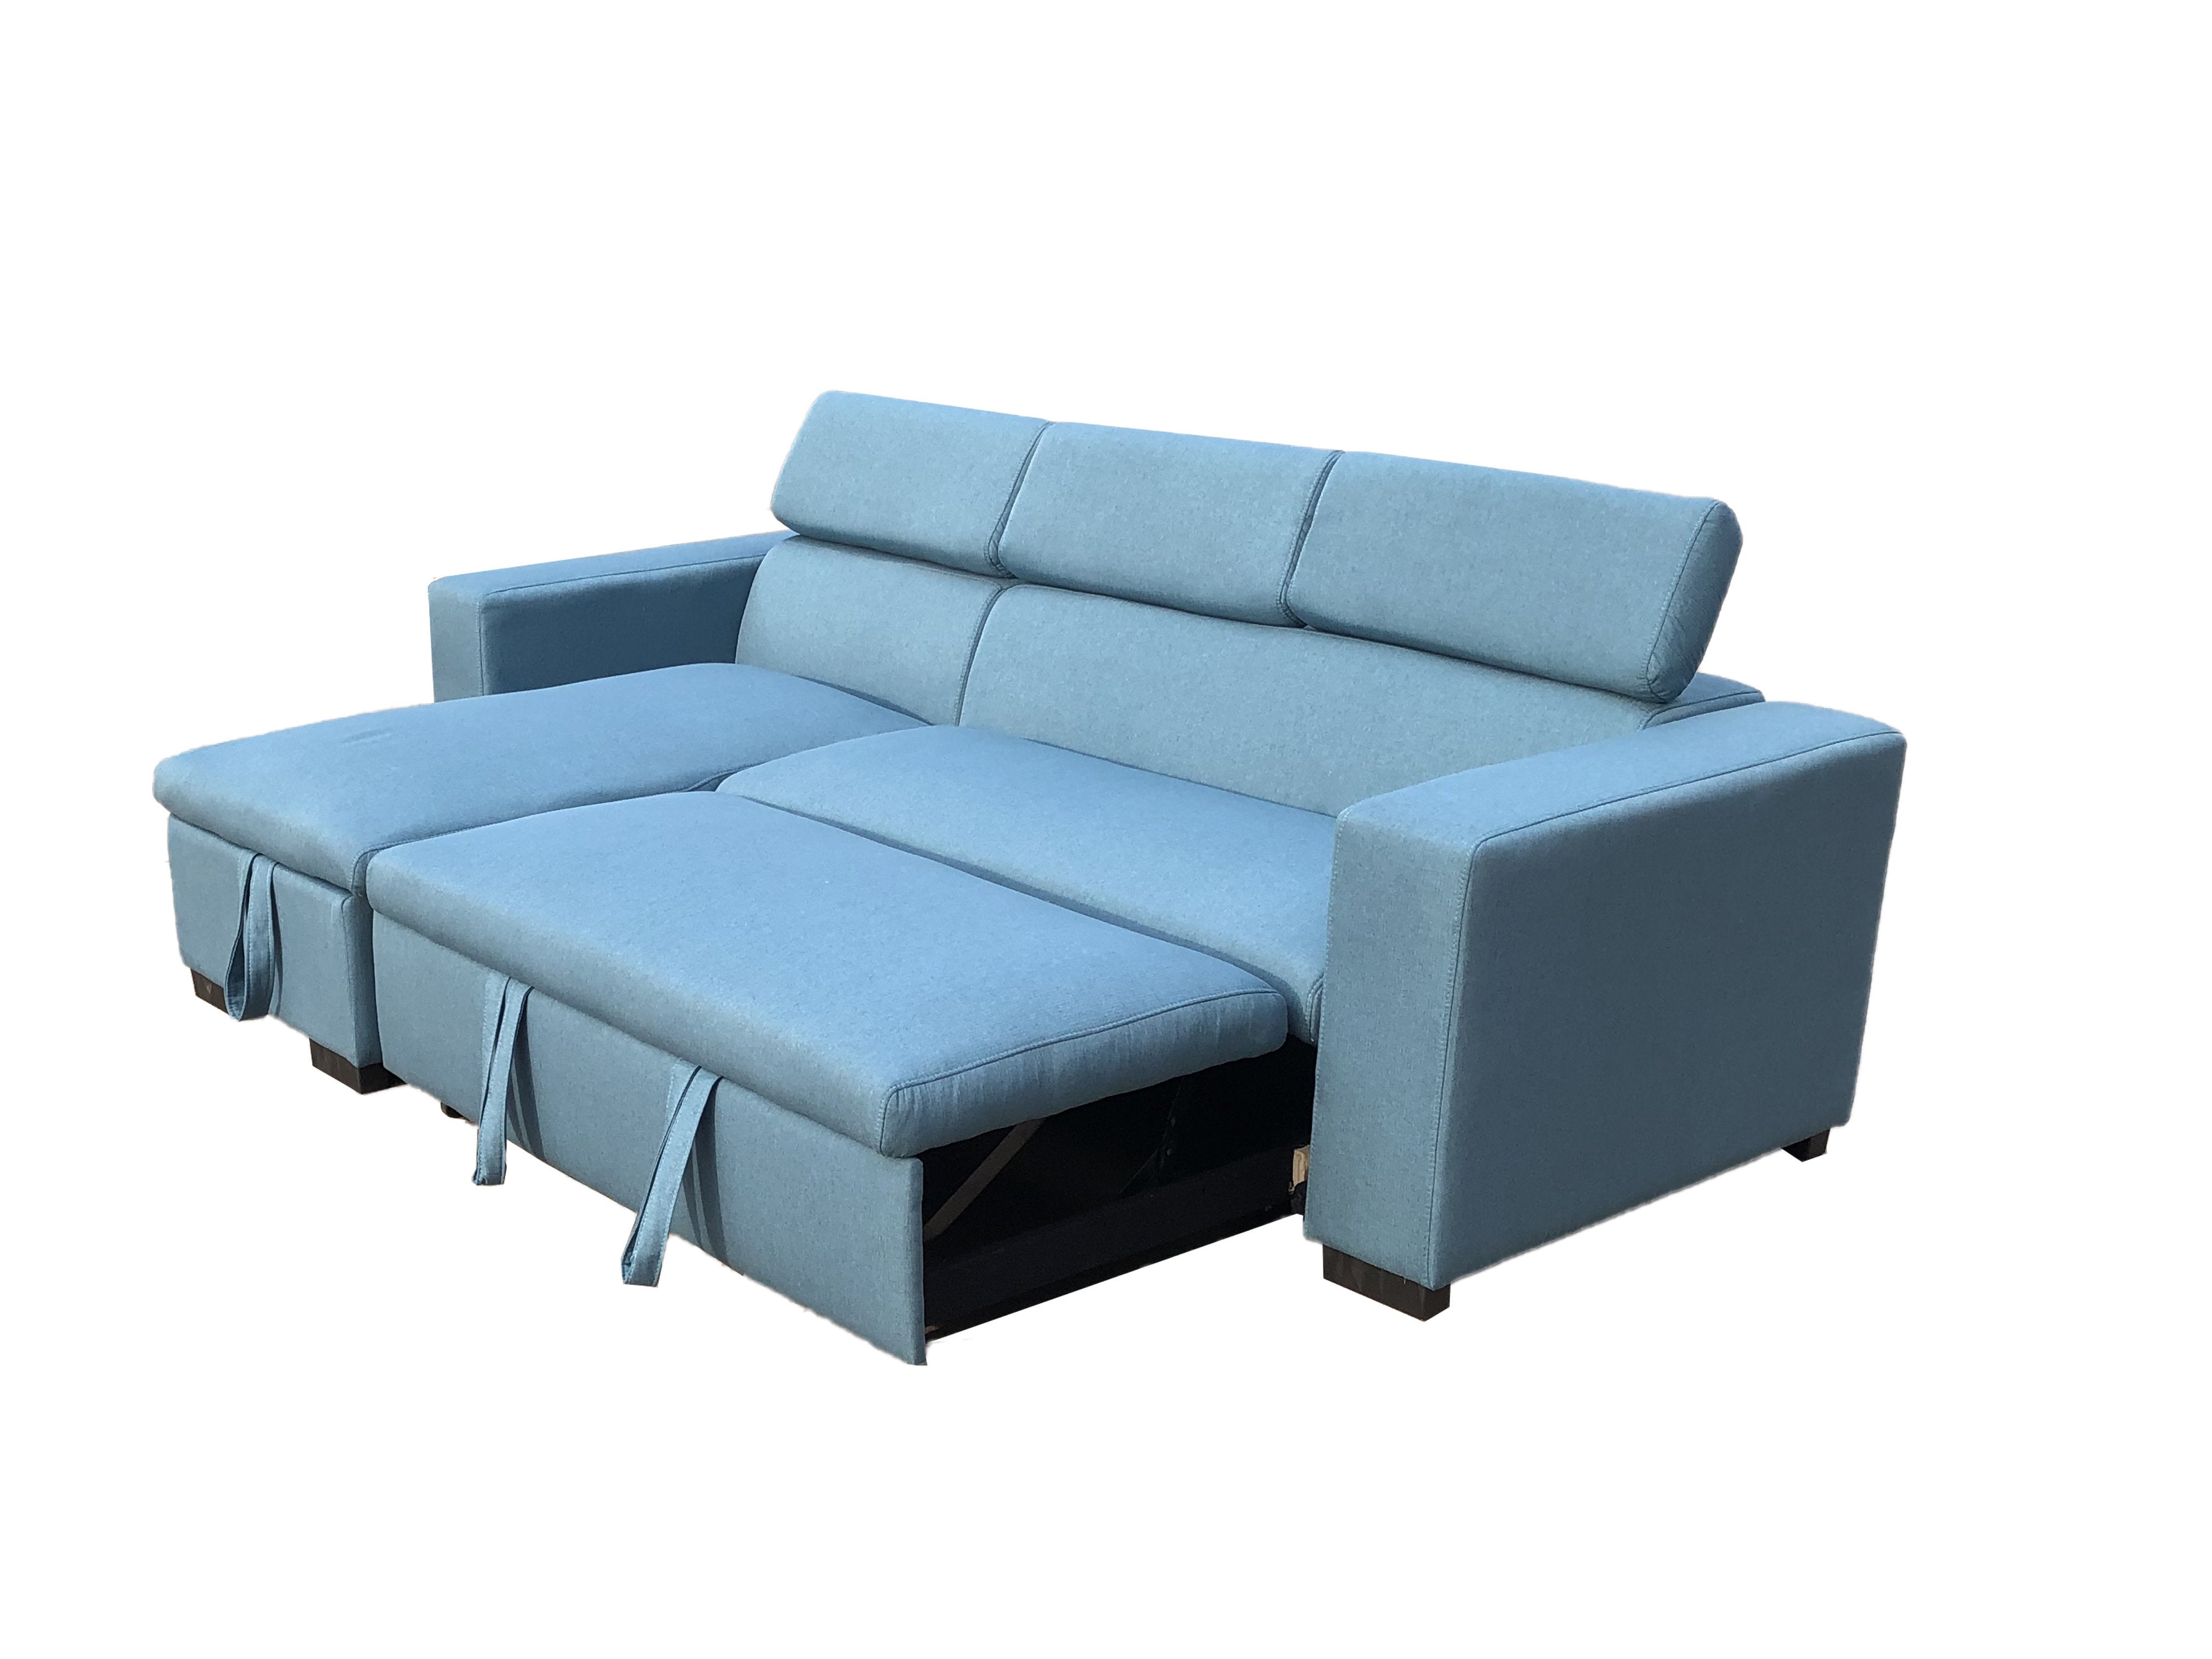 Top 82+ Alluring sofa with pullout air mattress Not To Be Missed